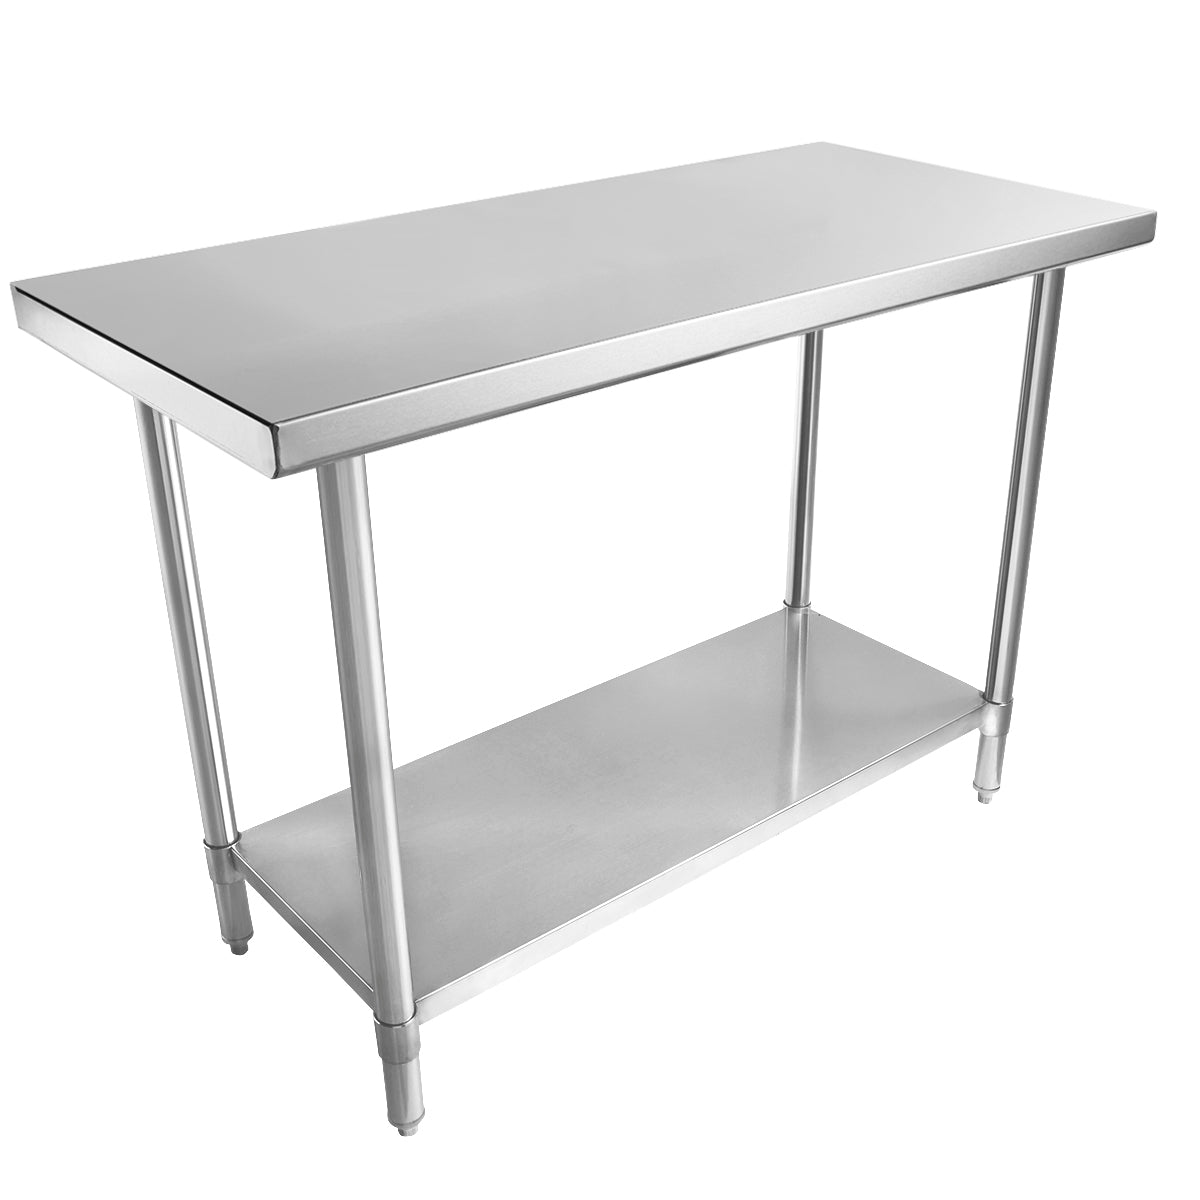 Empura 48" x 24" 16-Gauge 304 Stainless Steel Commercial Work Table with Flat Top plus 430 Stainless Steel Legs and Undershelf